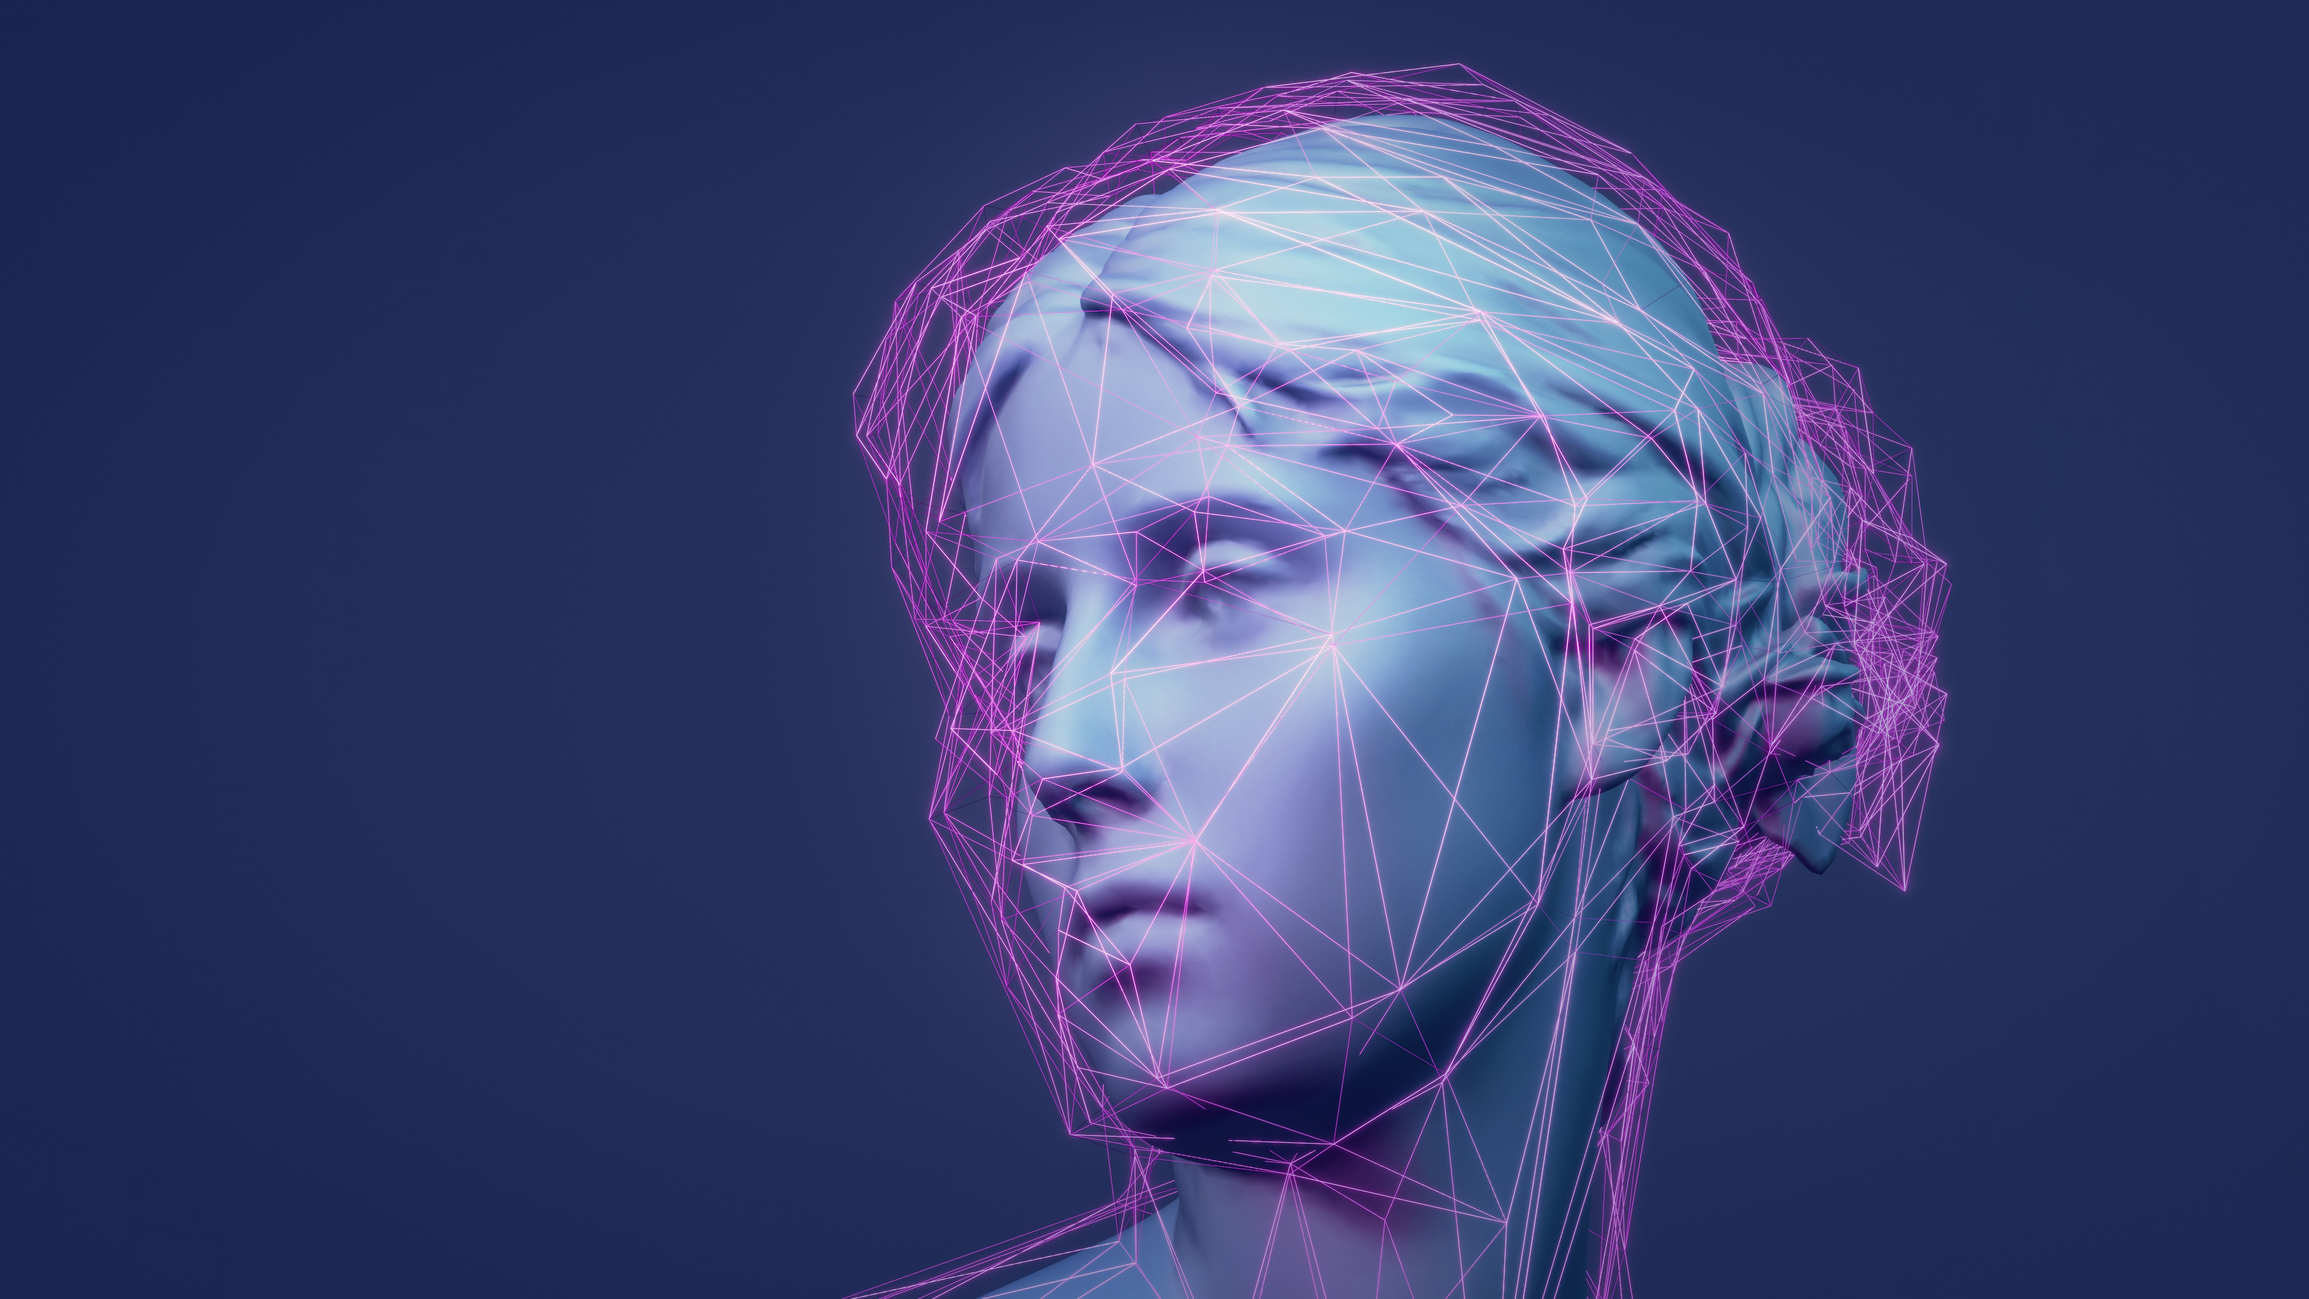 Classic 3D rendered Metaverse avatar sculpture with low poly glowing purple lines network.  Machine learning and artificial intelligence concept.  Example of animated 3D NFT illustrations.  Web 3.0 technology background.